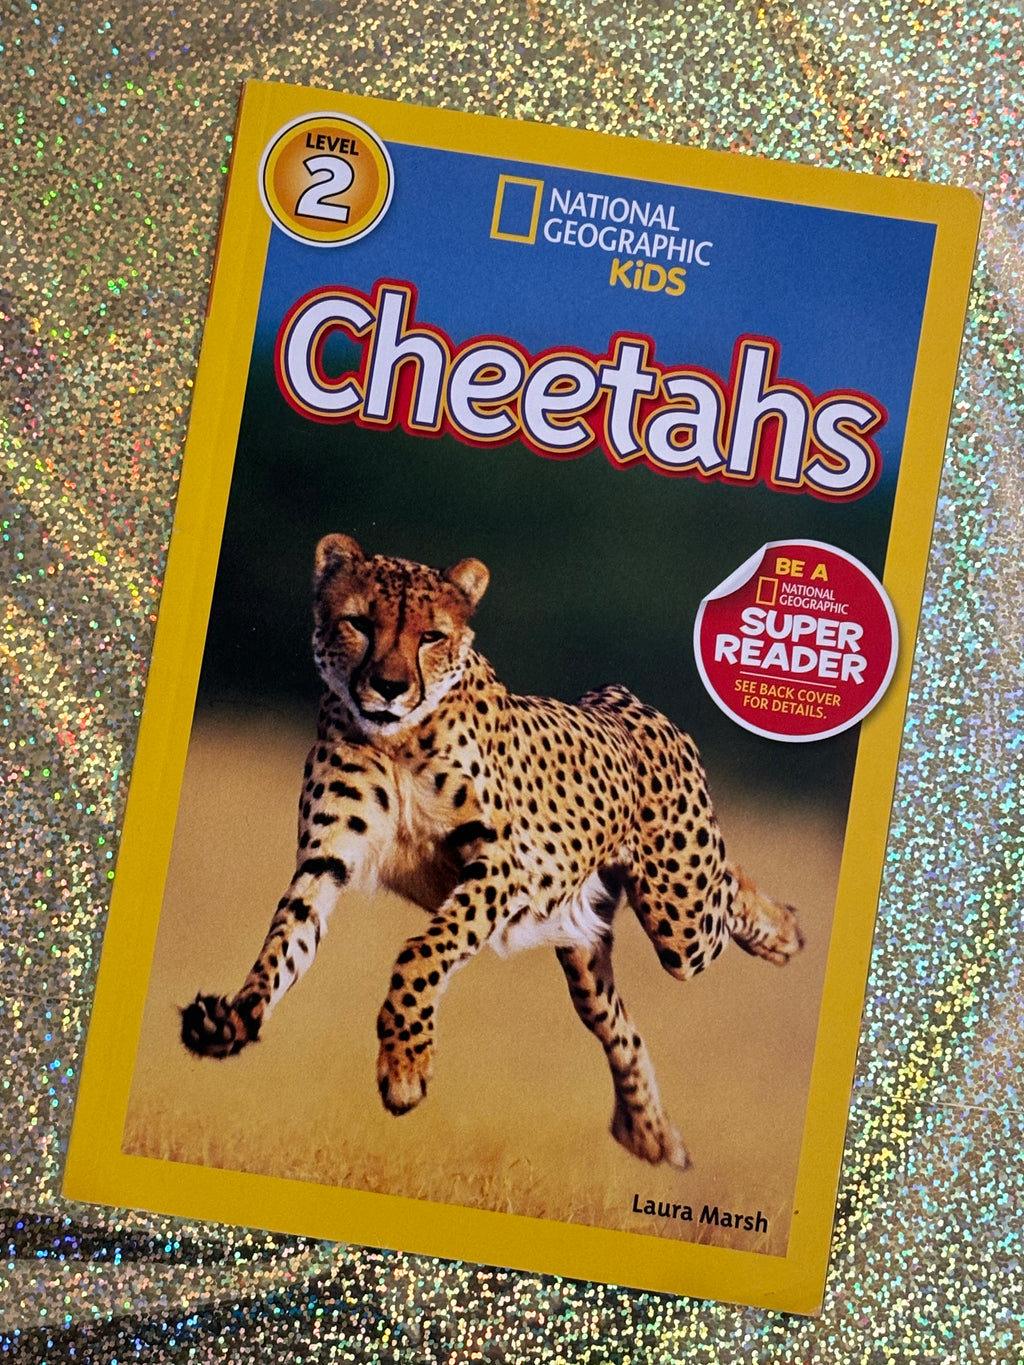 National Geographic Kids: Cheetahs- By Laura Marsh (LEVEL 2 READER)